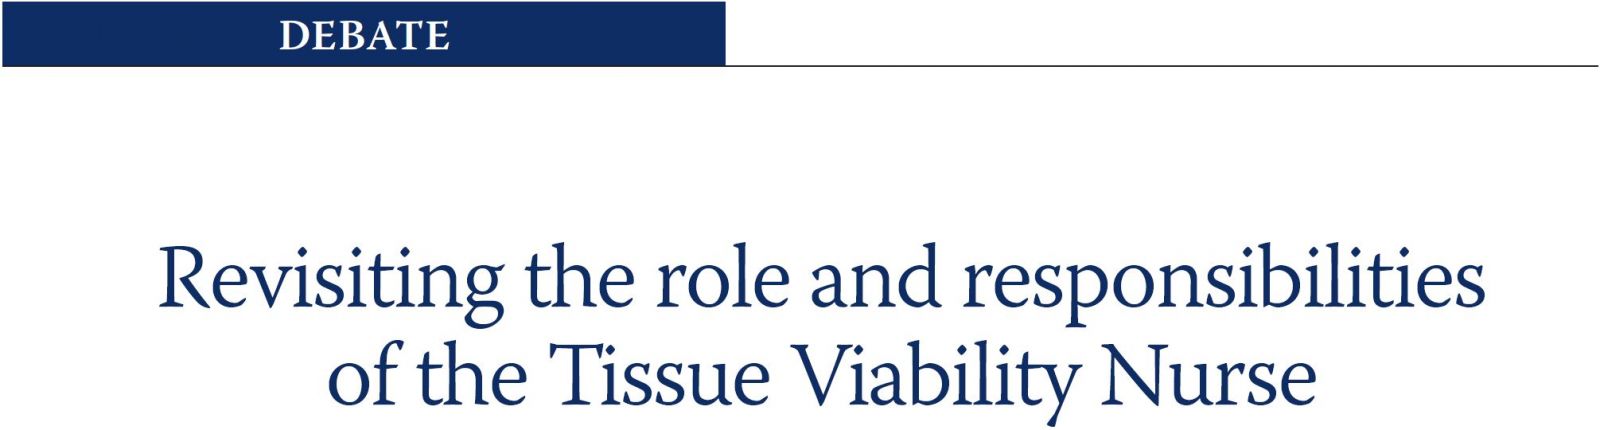 Revisiting the role and responsibilities of the Tissue Viability Nurse